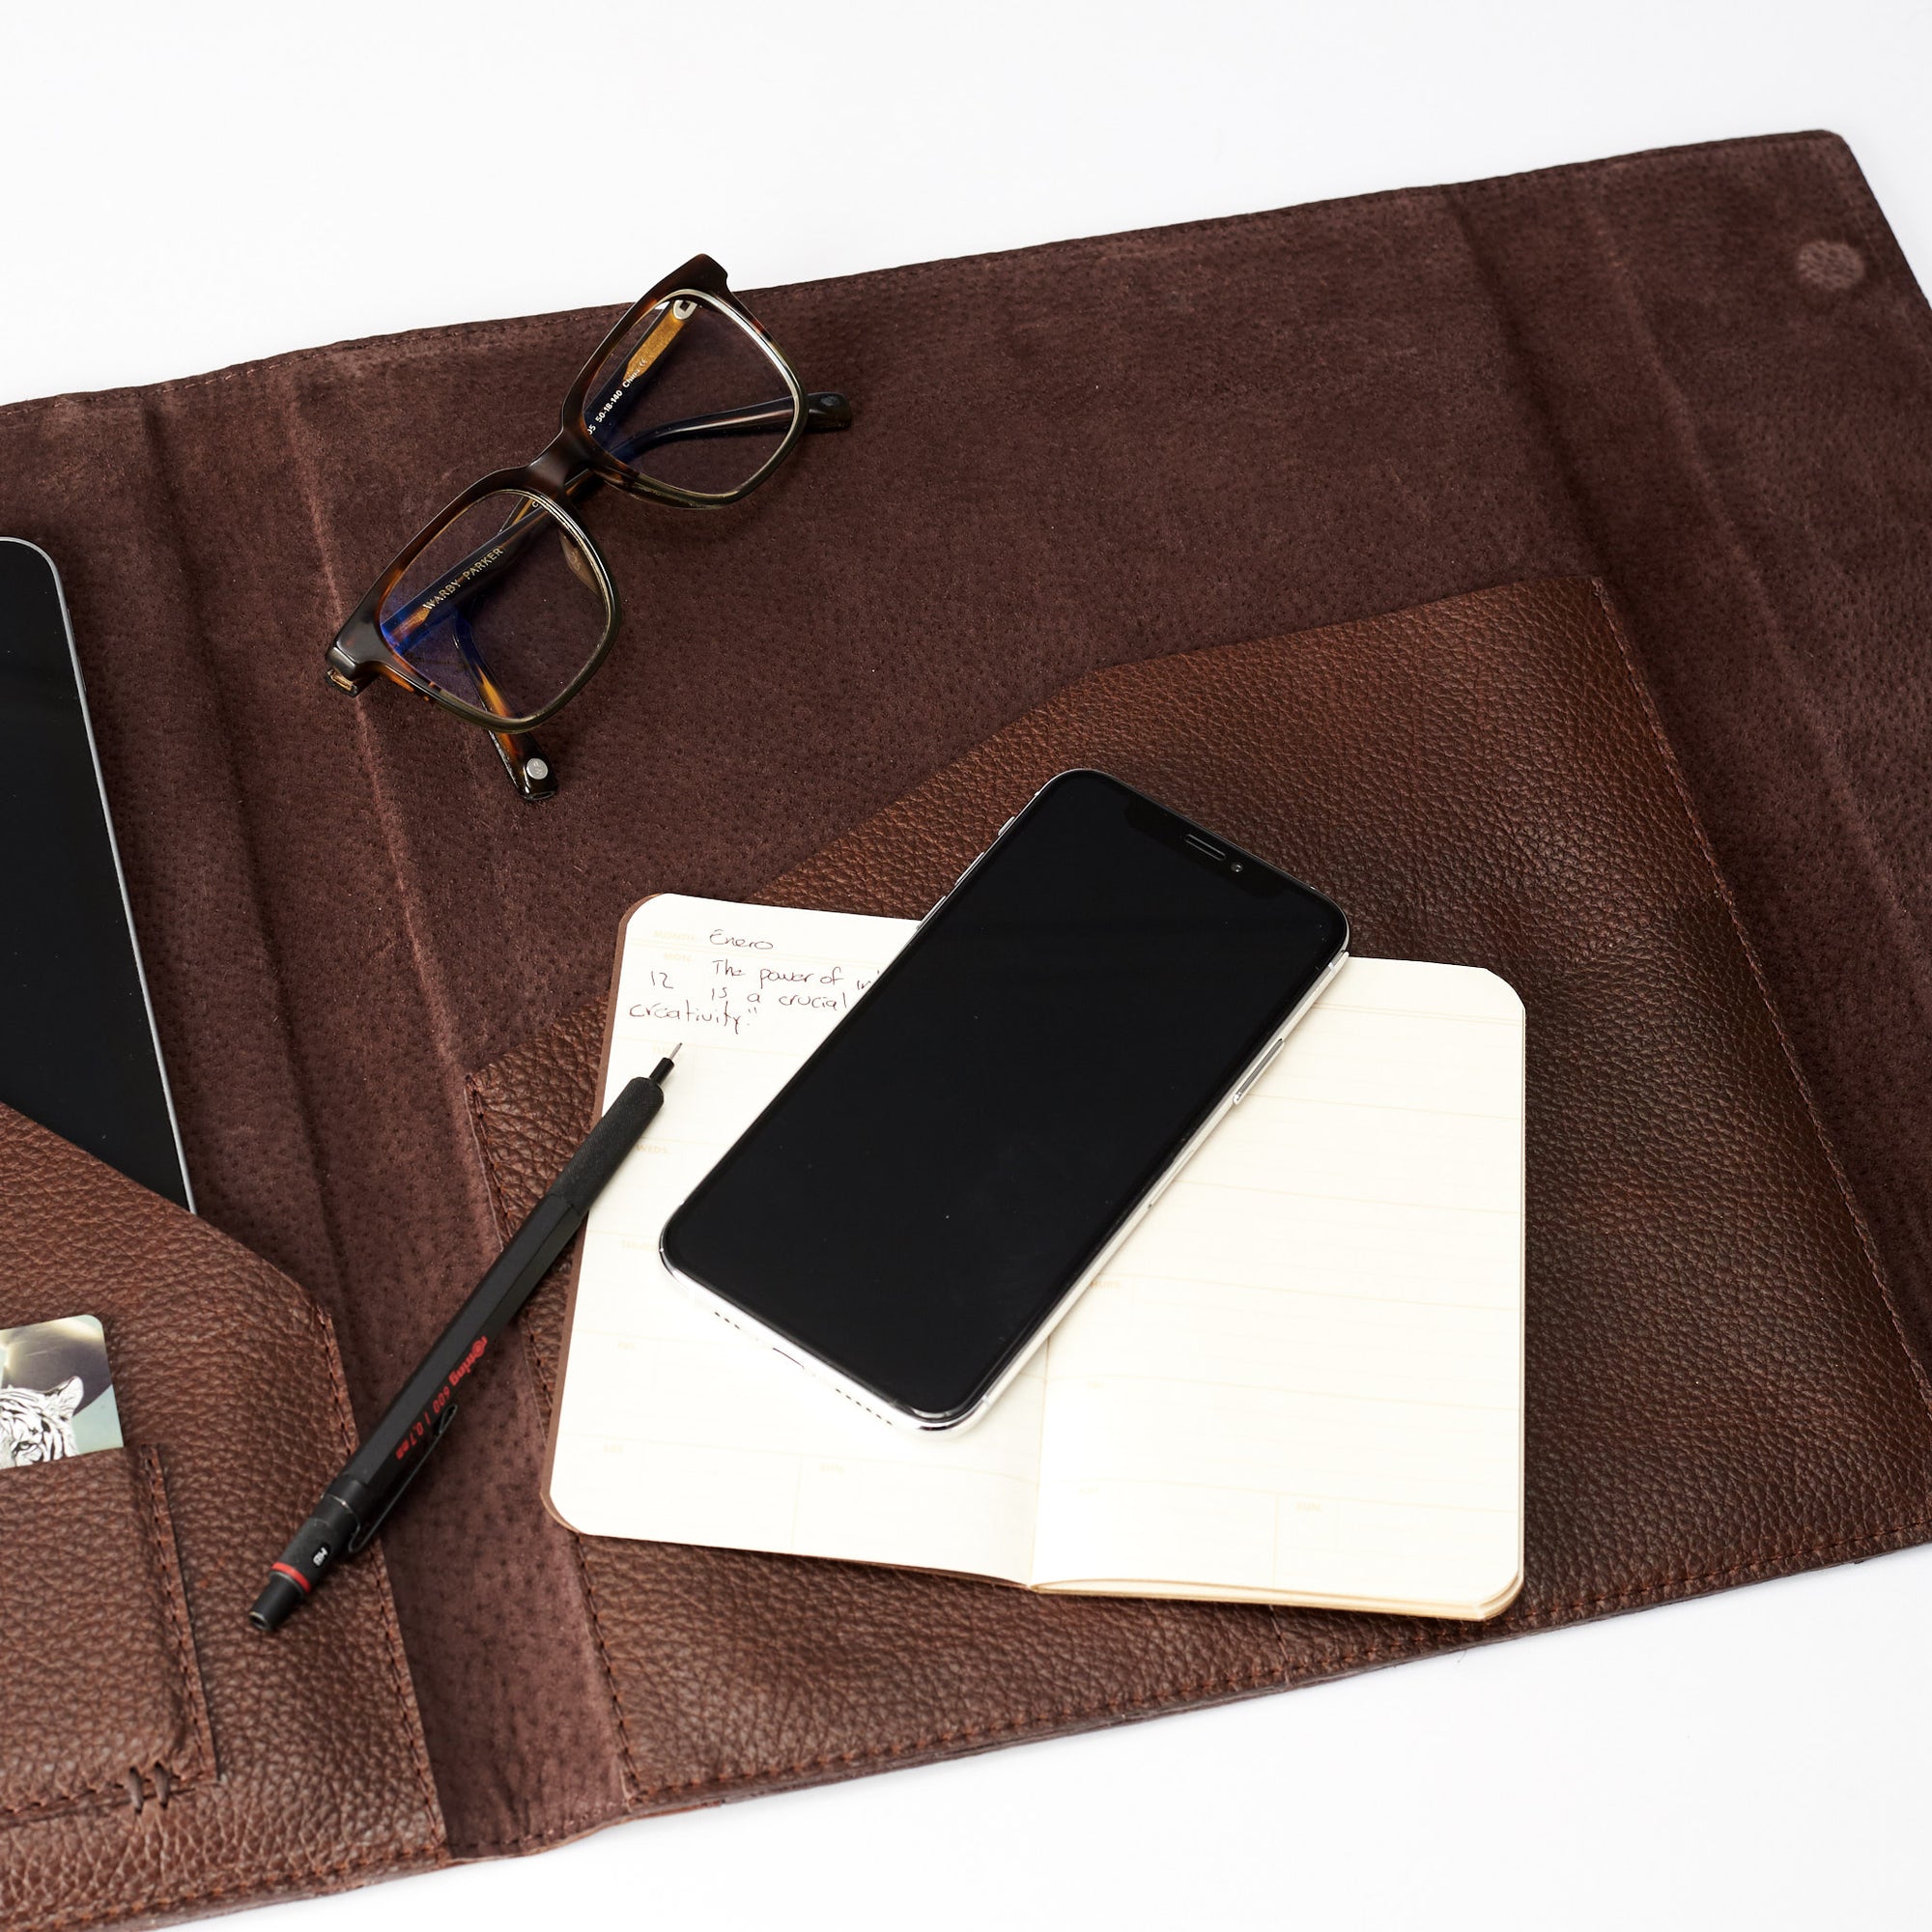 Style inside view. Brown Laptop Tablet Portfolio. Business Document Organizer for Men by Capra Leather